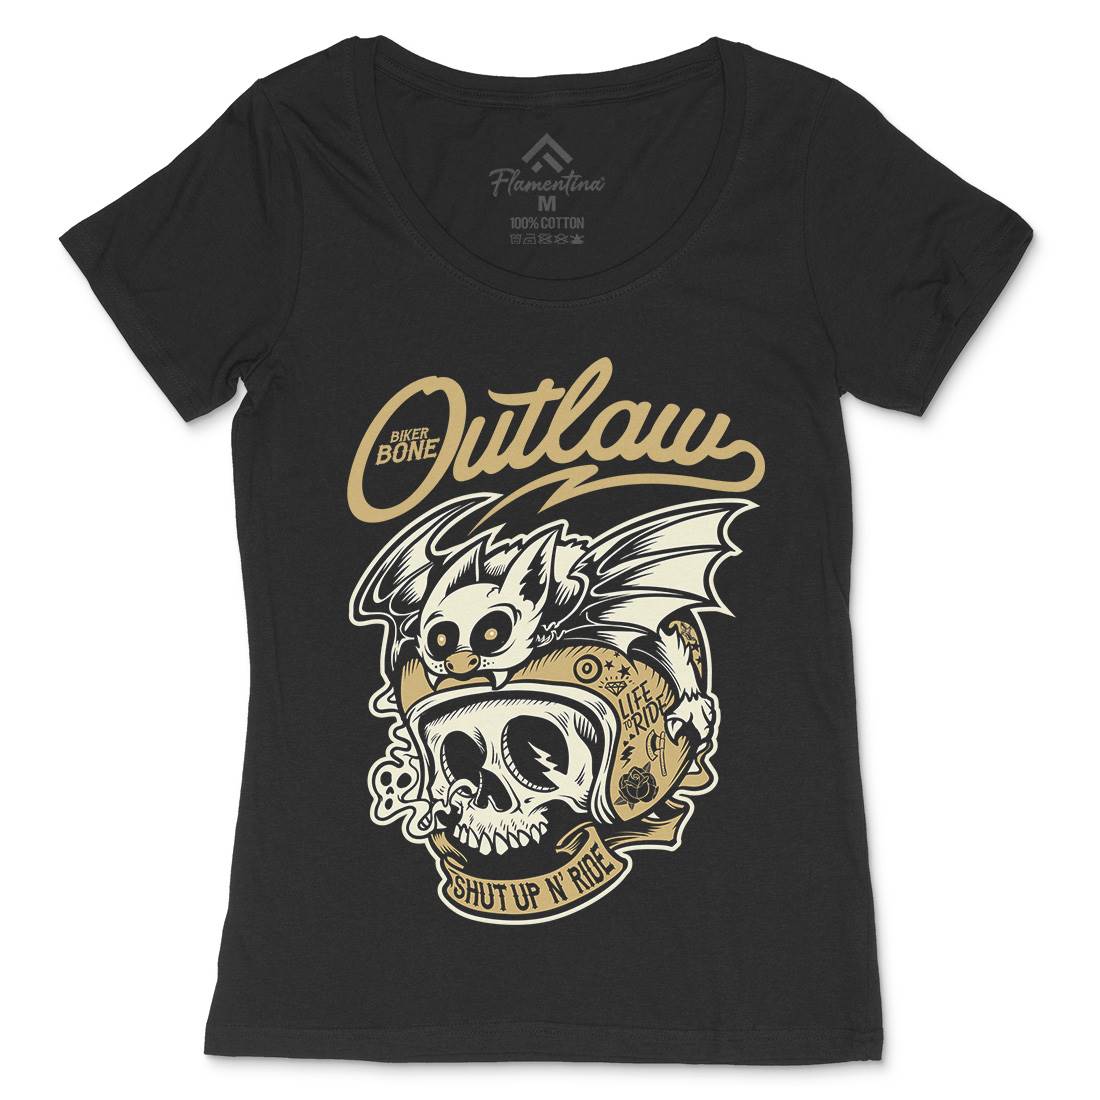 Outlaw Womens Scoop Neck T-Shirt Motorcycles D063